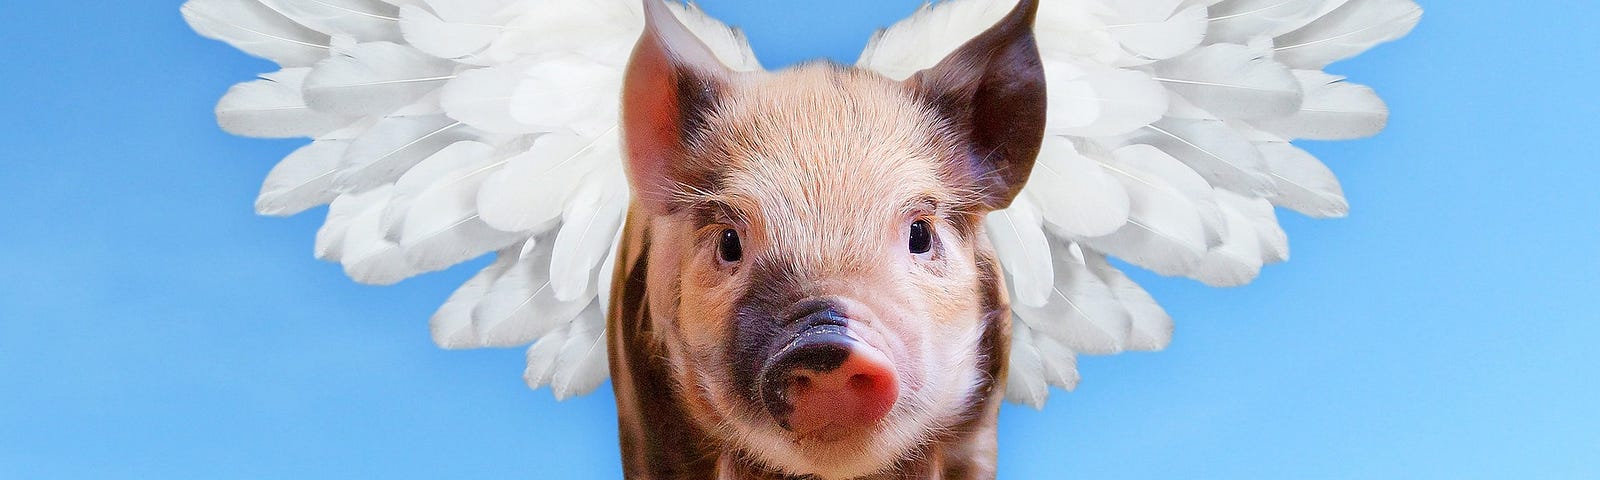 limiting beliefs, mindset, positive affirmations, when pigs fly